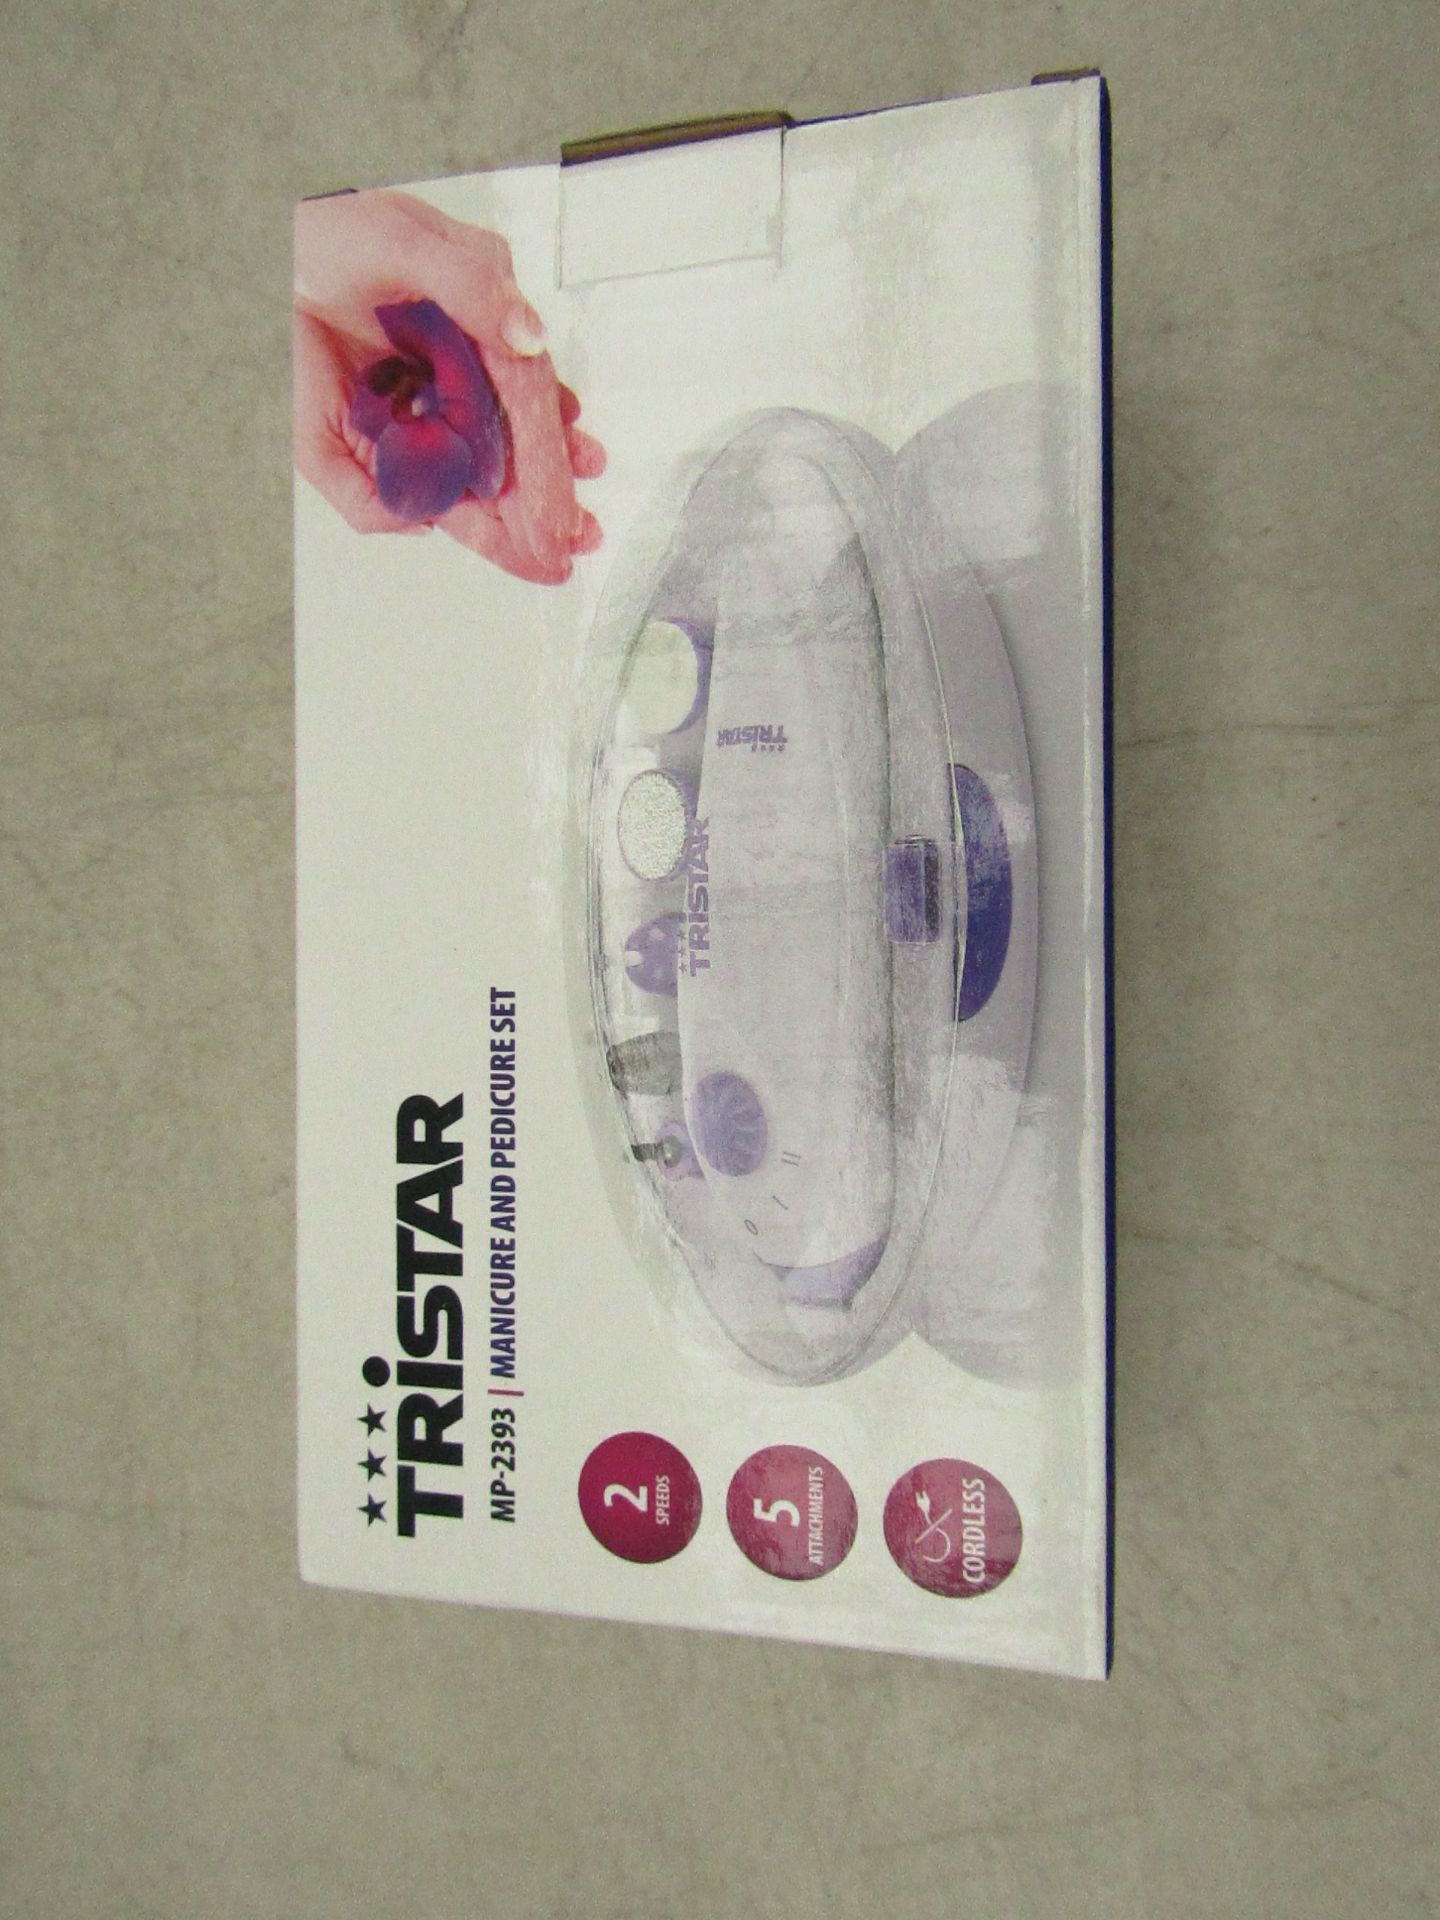 Tri Star manicure and pedicure set, new and boxed.